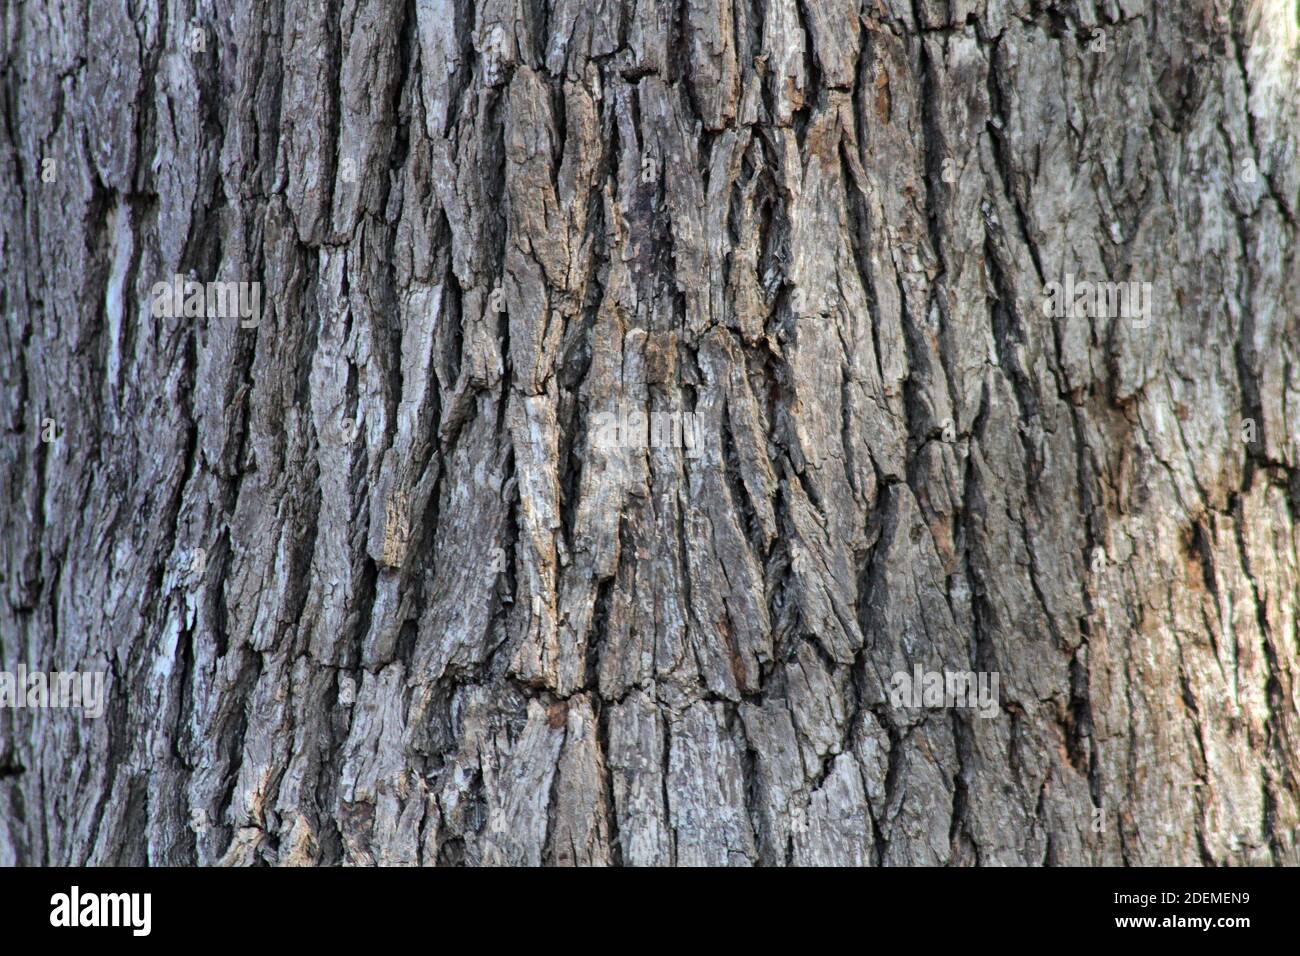 Texture of bark, Kruger National Park, South Africa Stock Photo